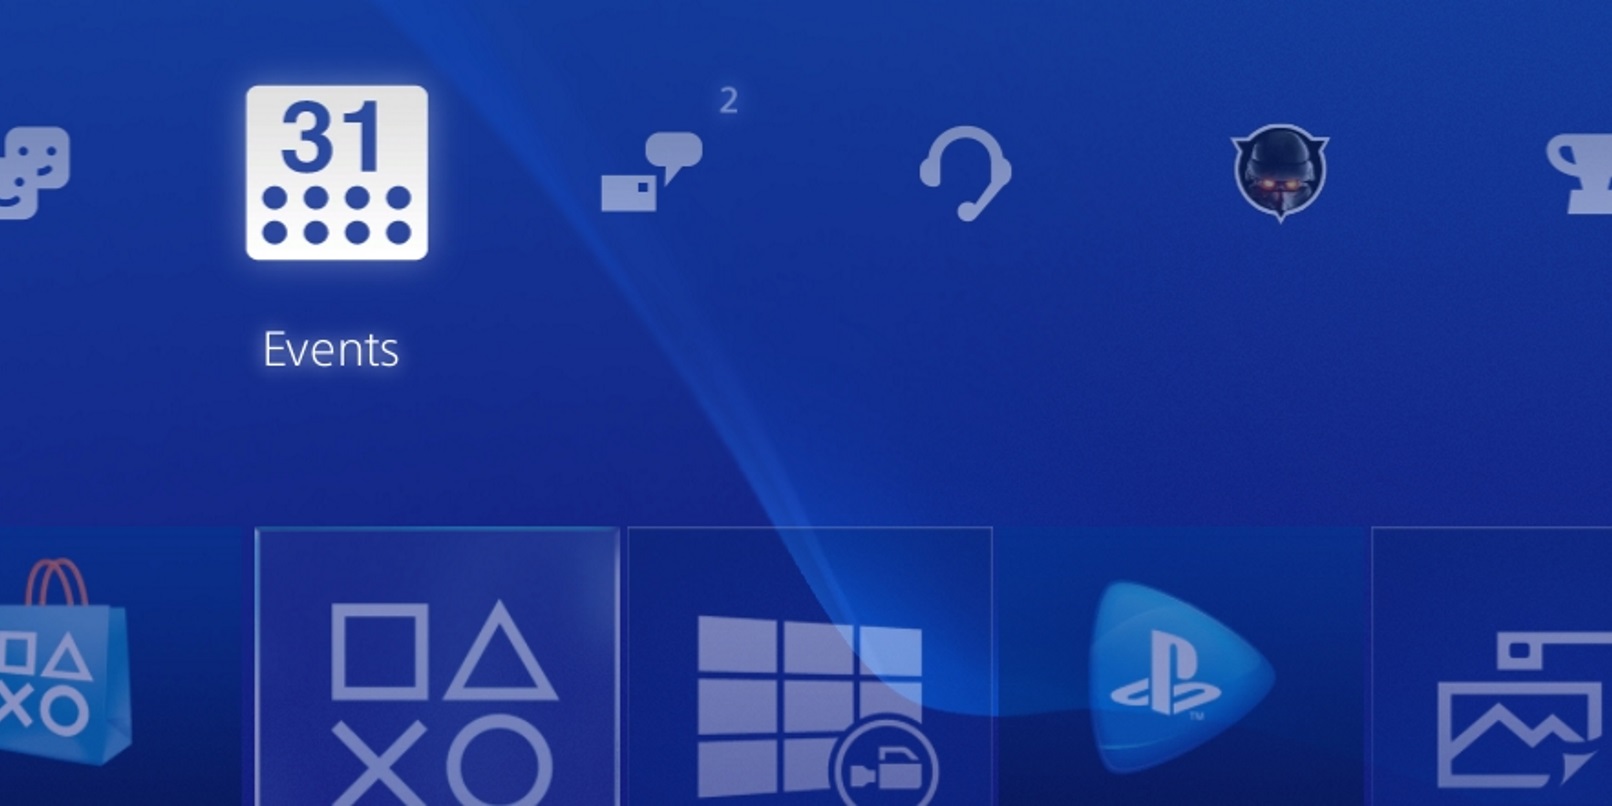 Playstation 4 Update Makes Sharing Video Easy